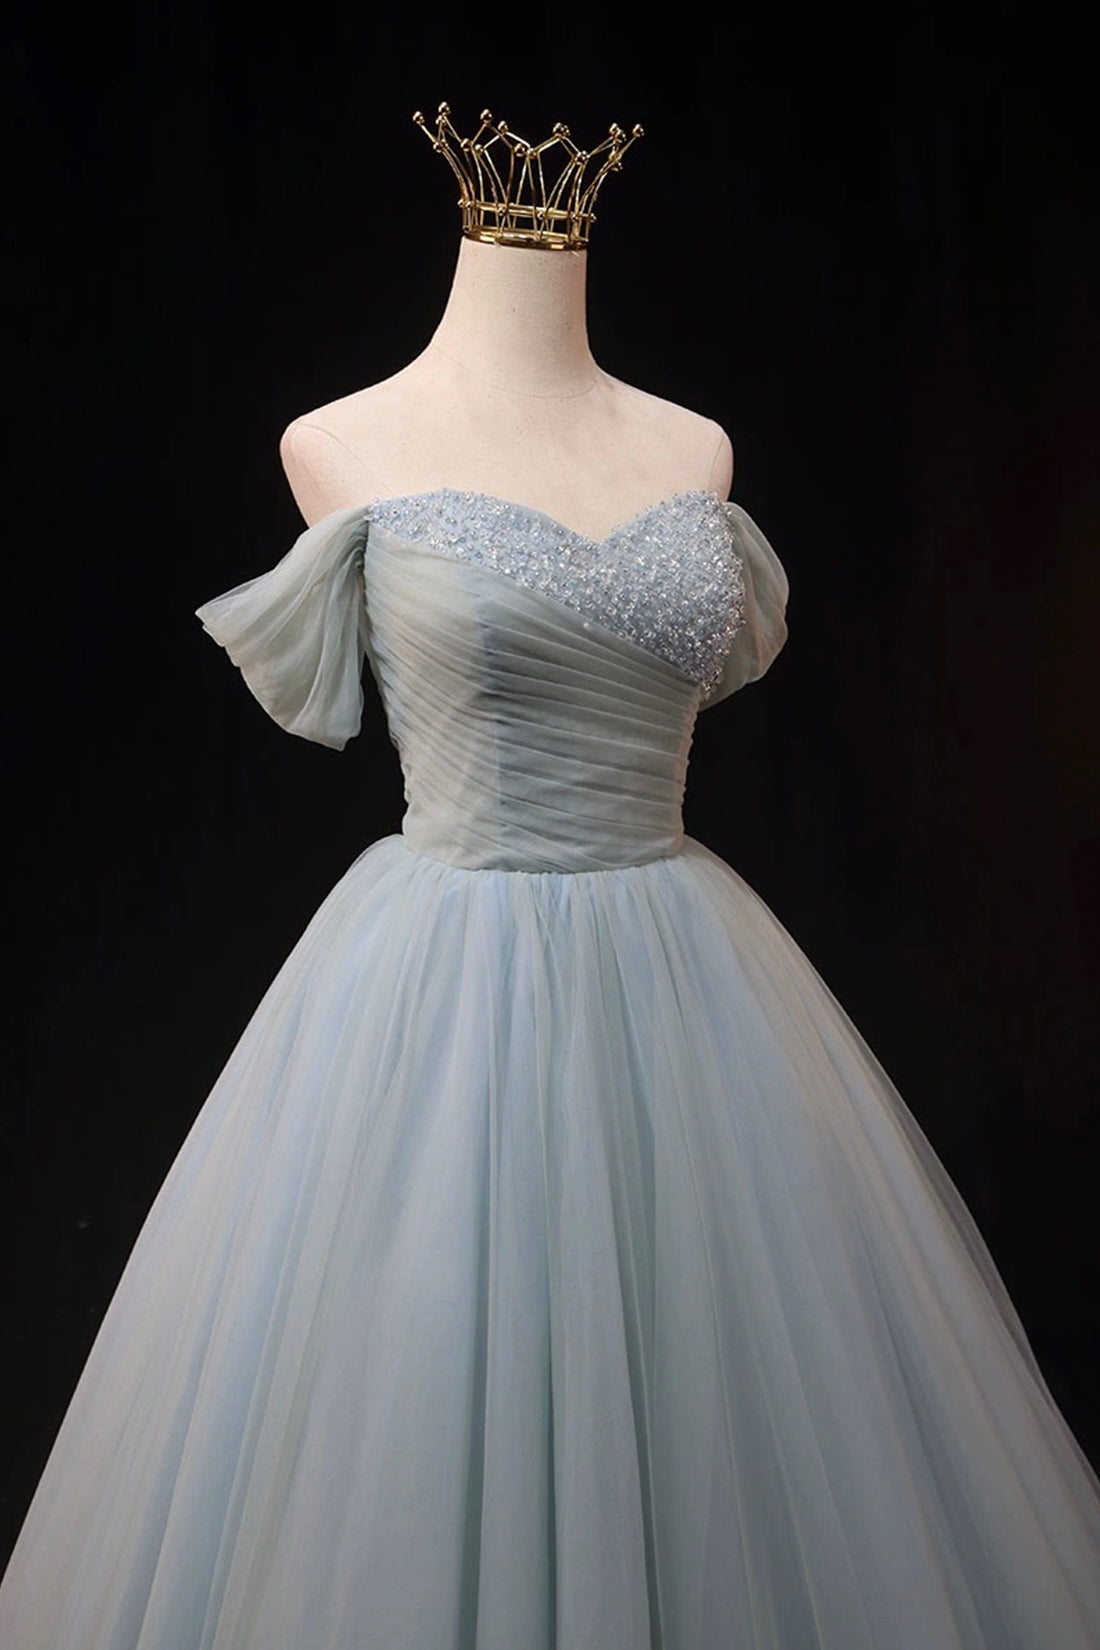 Dusty Blue Tulle Beaded Floor Length Formal Dress, Off the Shoulder A-Line Evening Party Dress